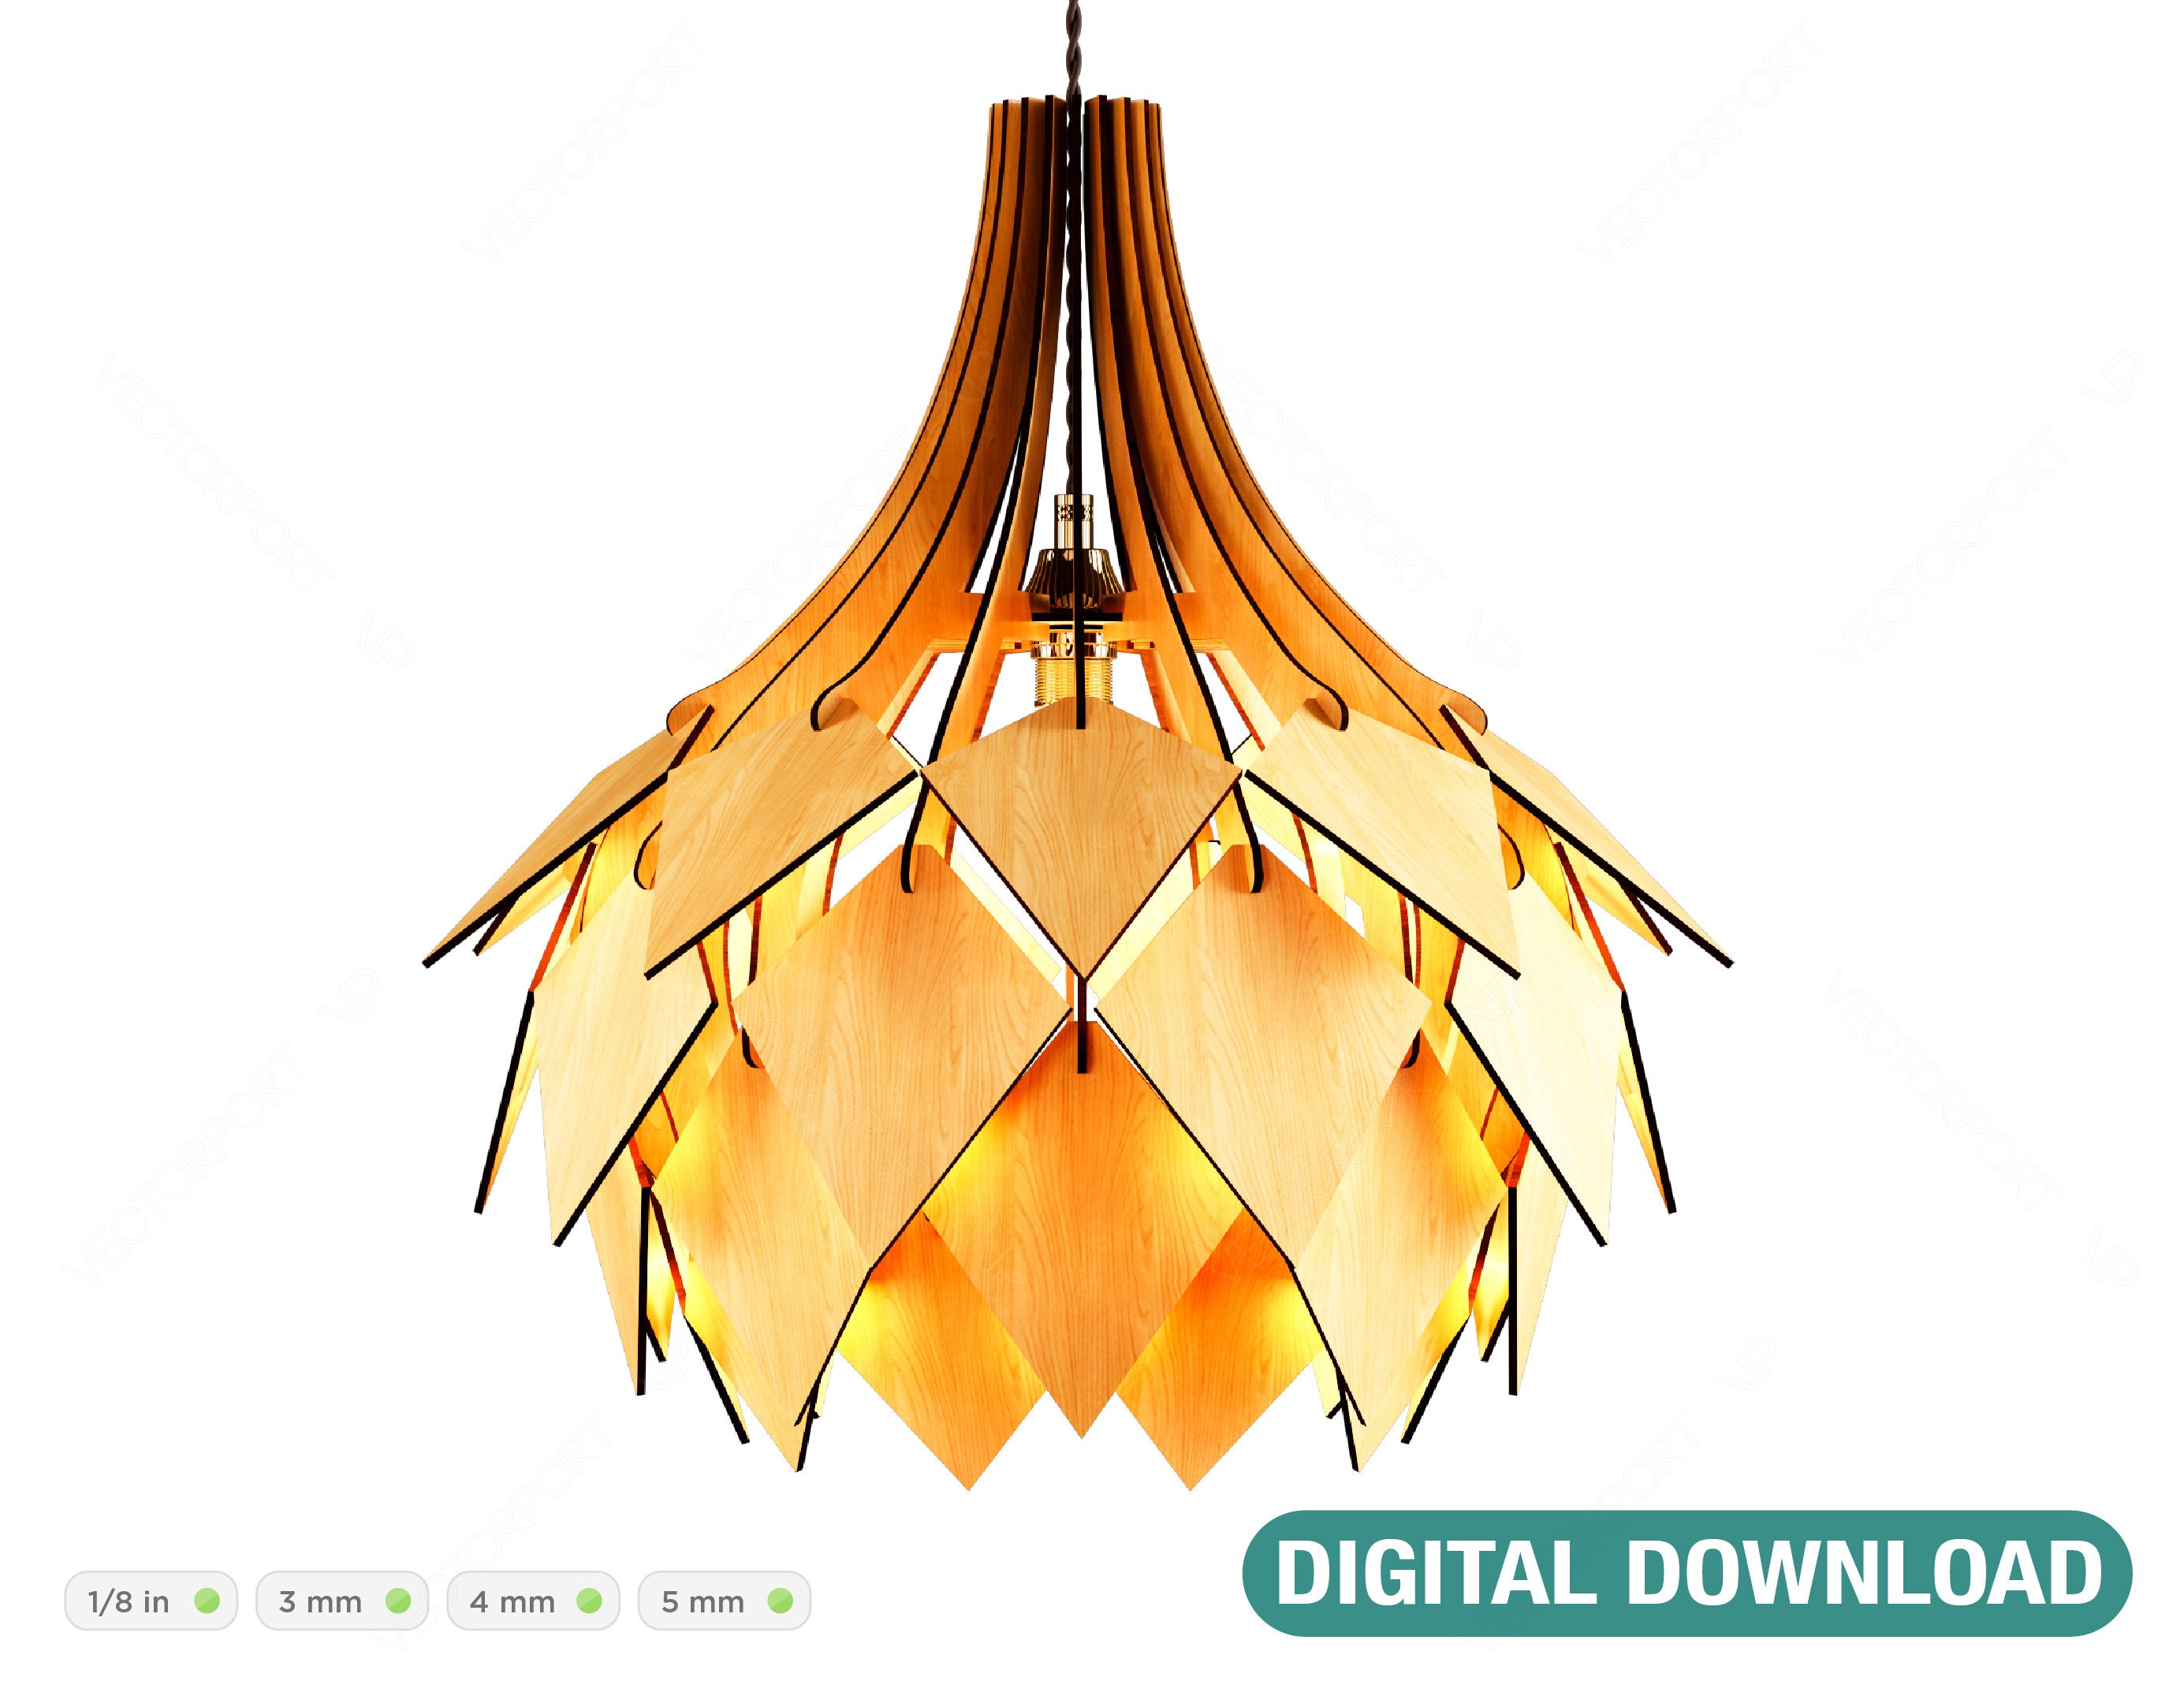 Cut file of Swedish design lamp - Instant Download for laser cutting.